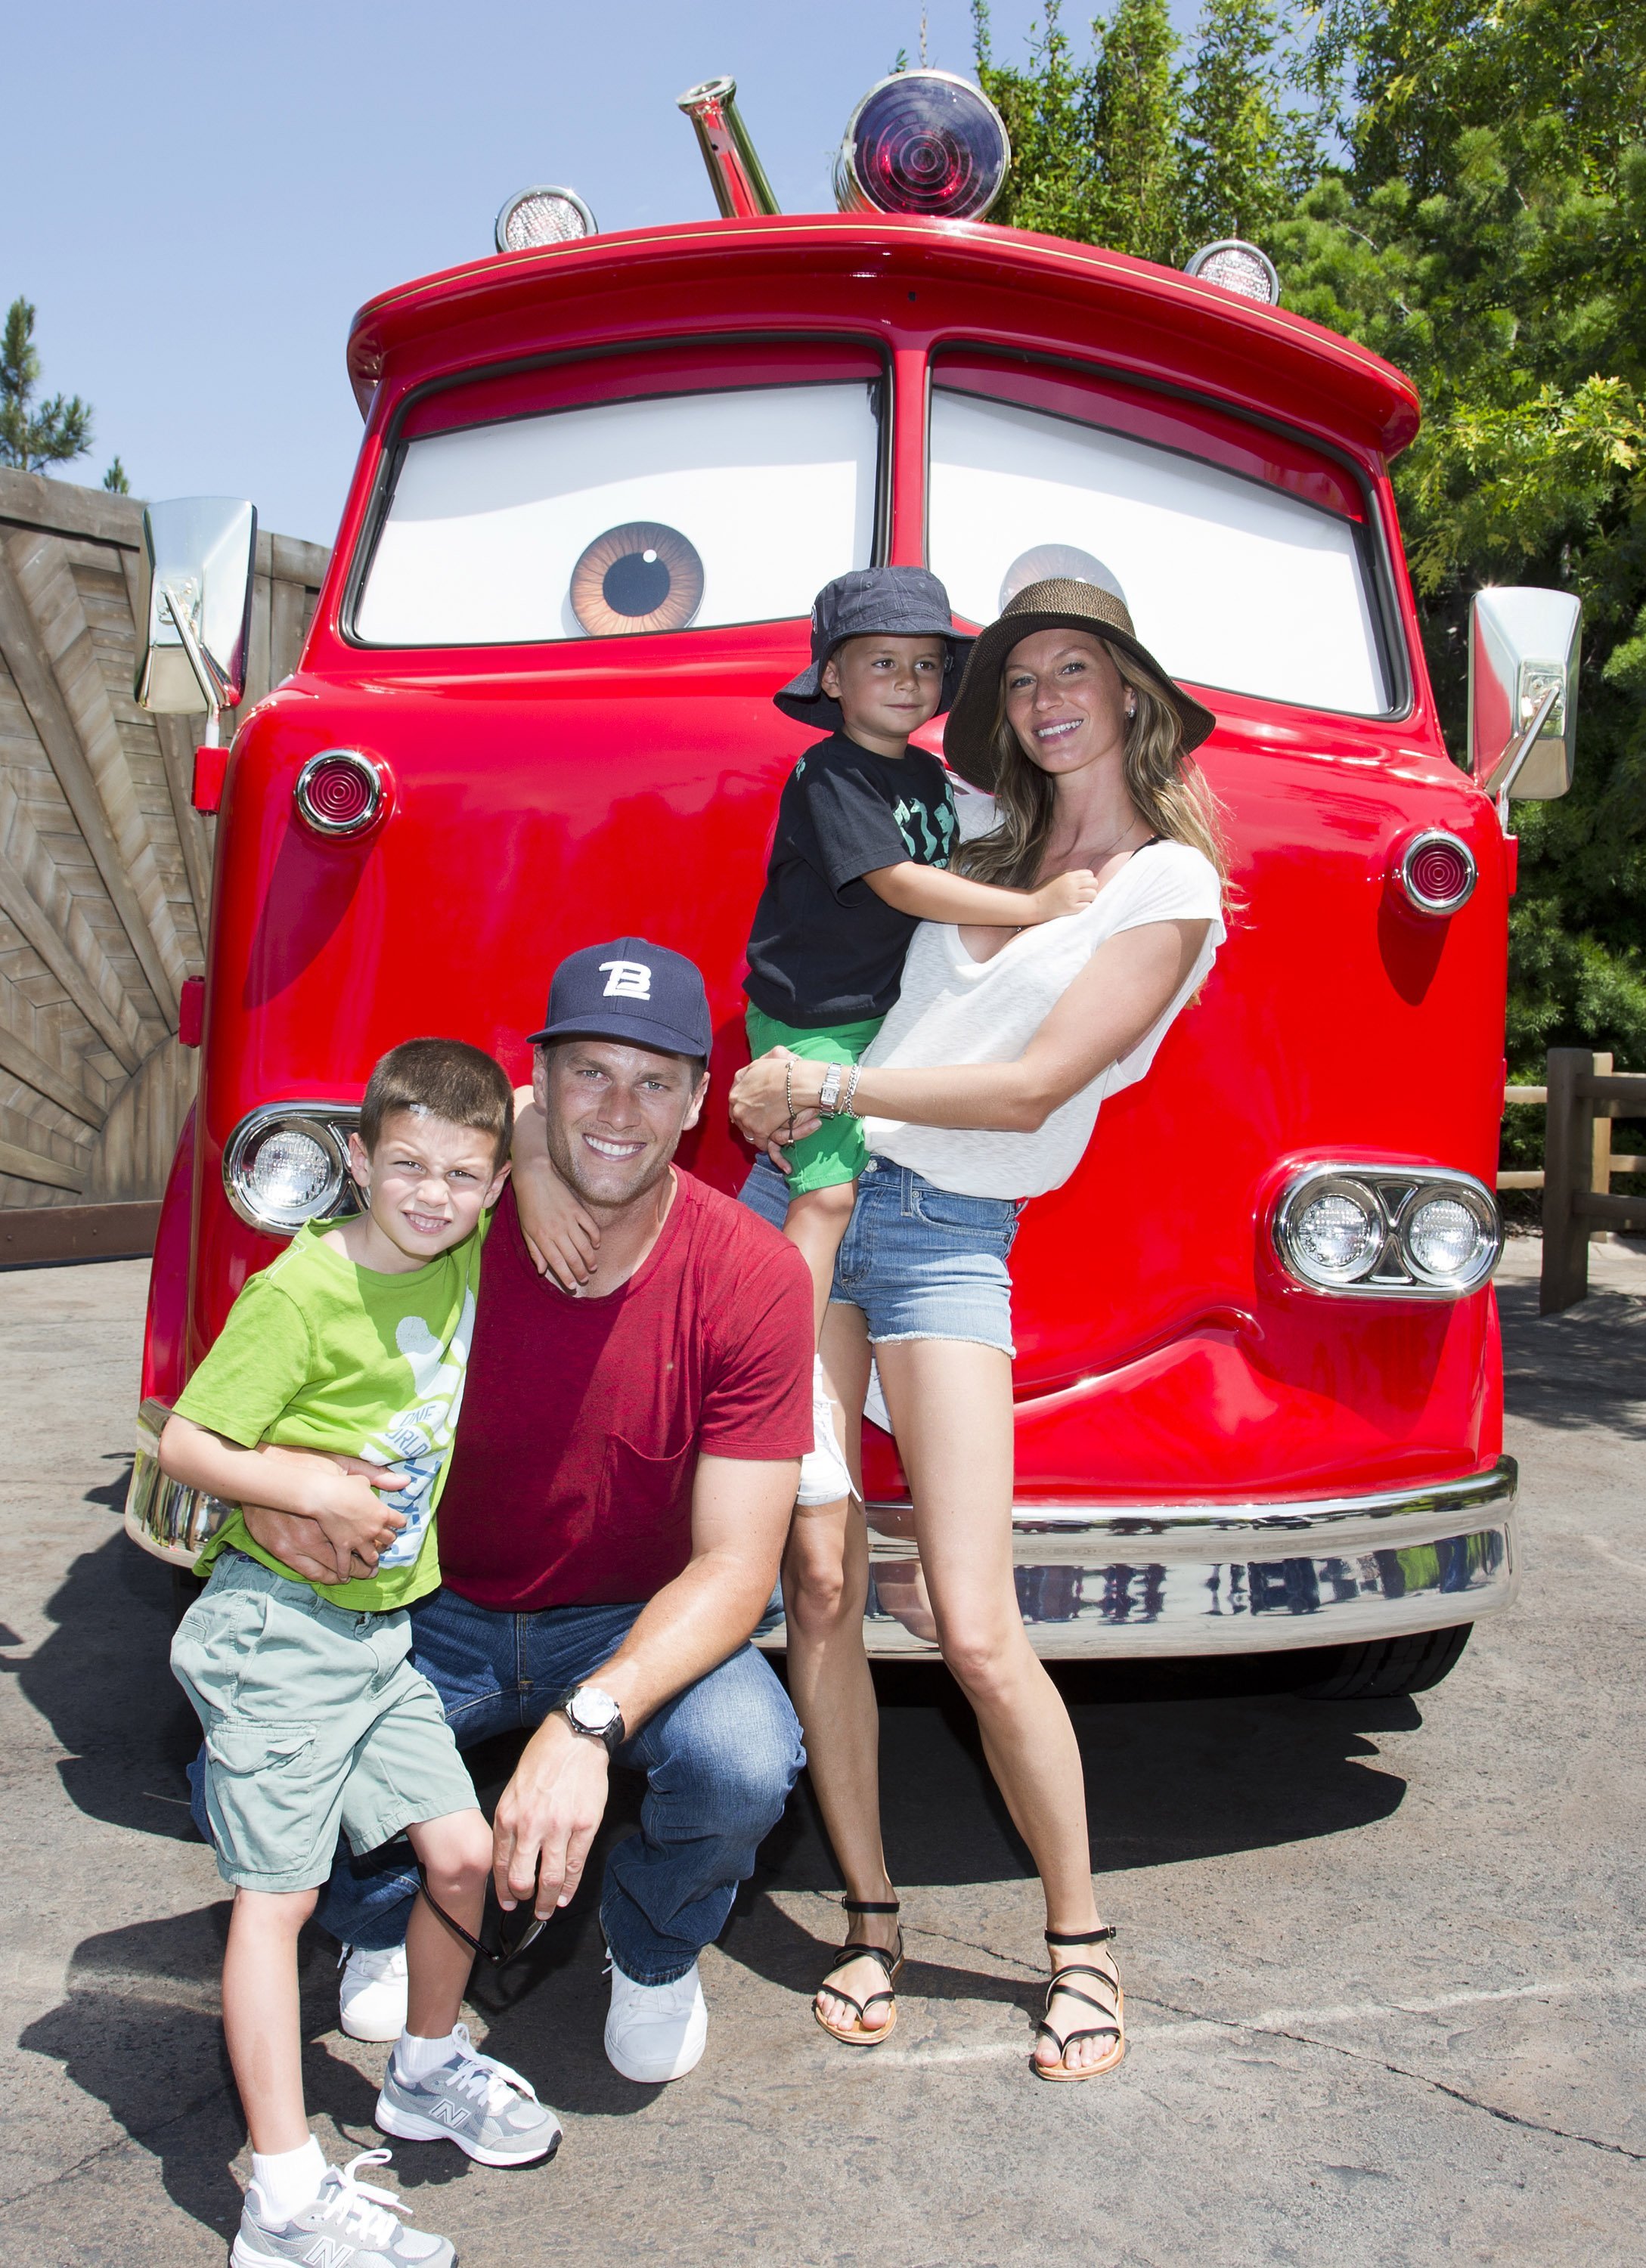  Tom Brady, his son Jack, 5, Gisele Bundchen, and their son Benjamin, 3, pose with Red the Fire Truck at Cars Land at Disney California Adventure park | Source: Getty Images